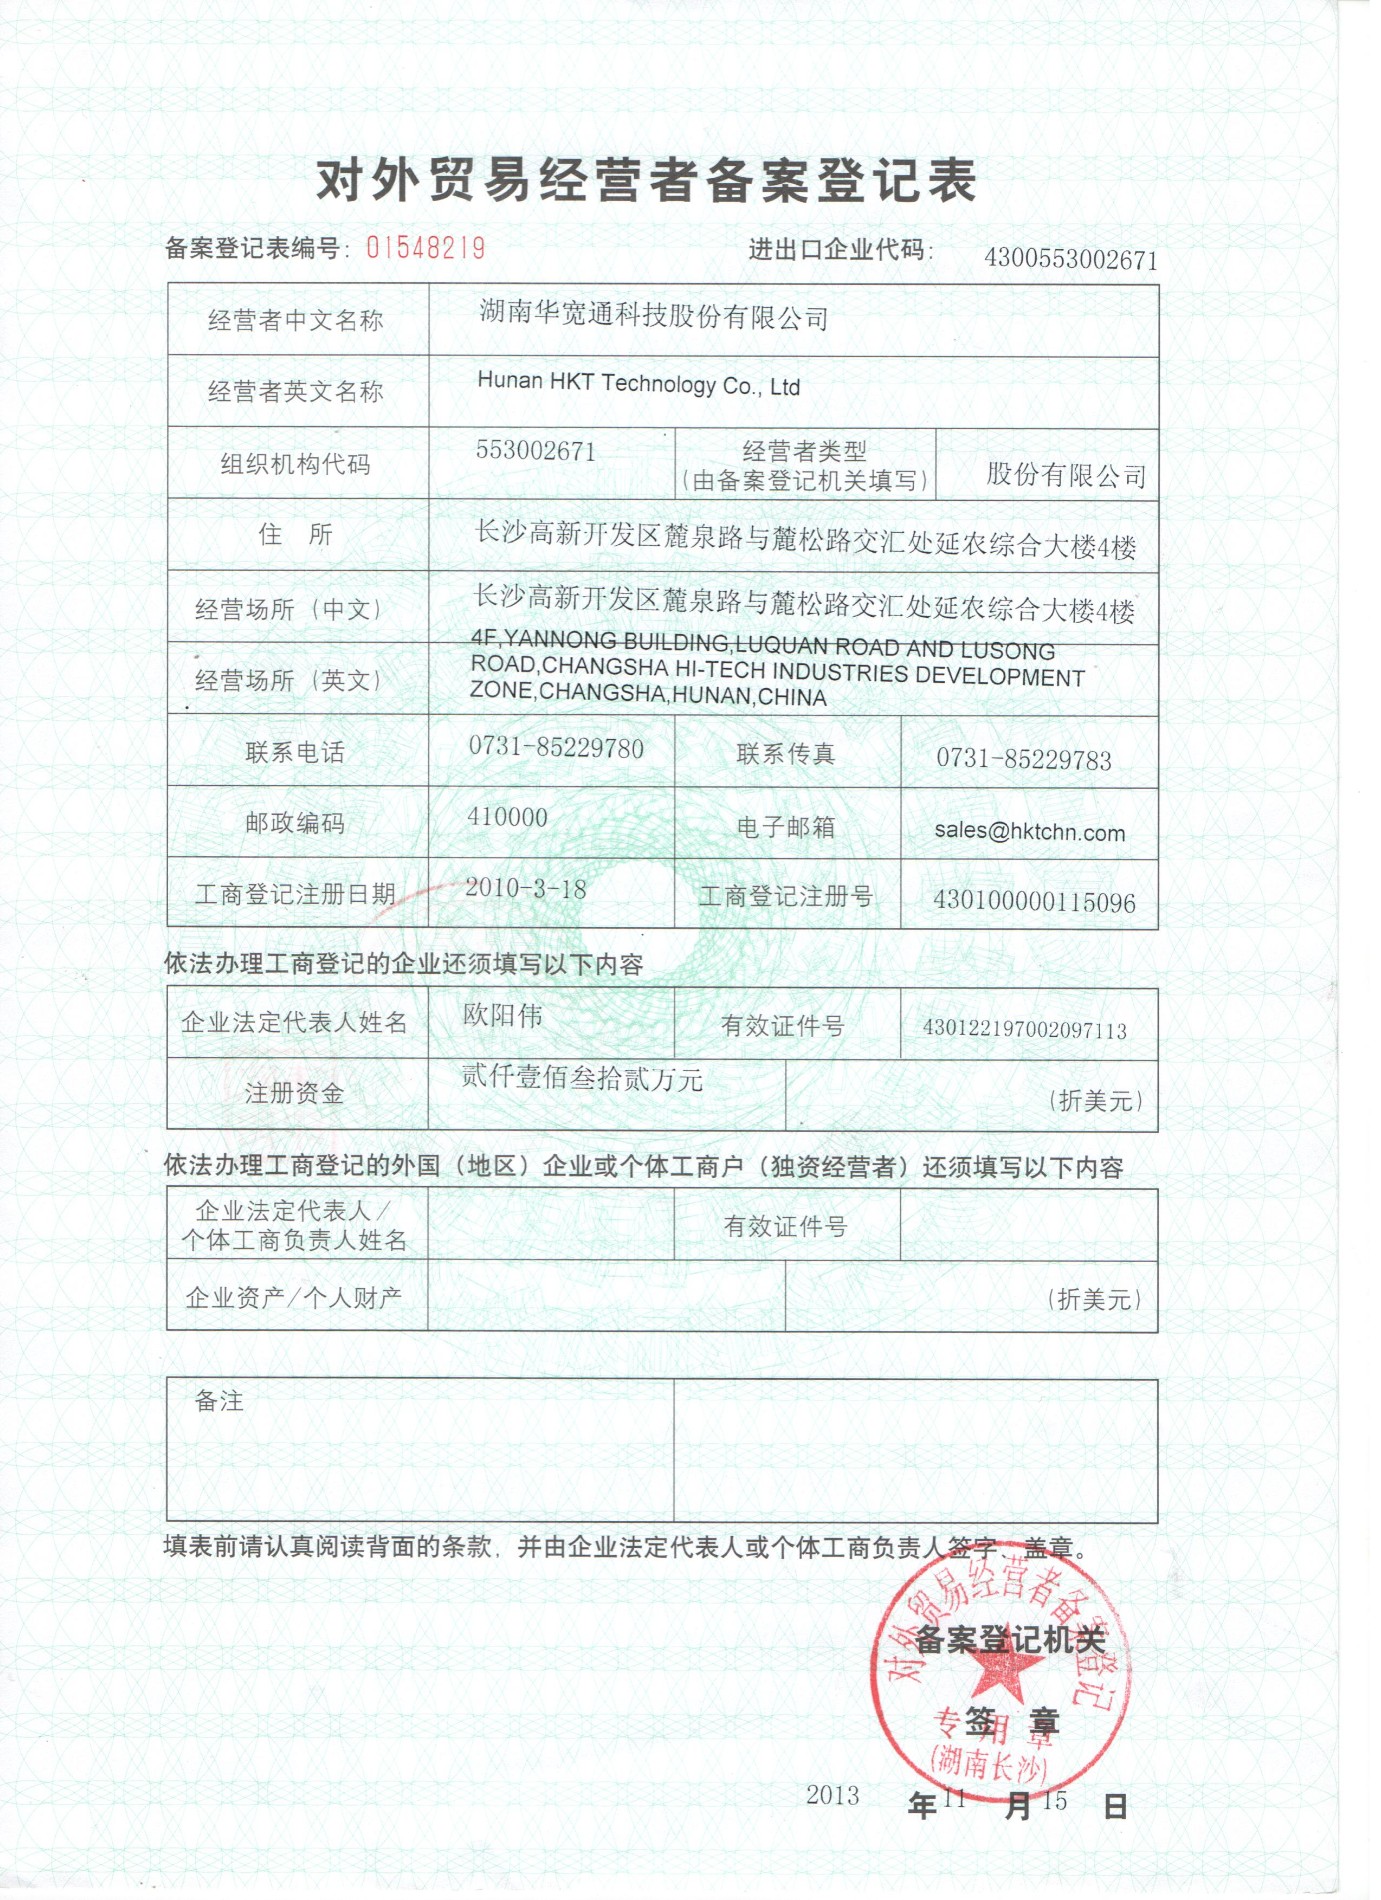 20131115 record registration form for foreign trade operators